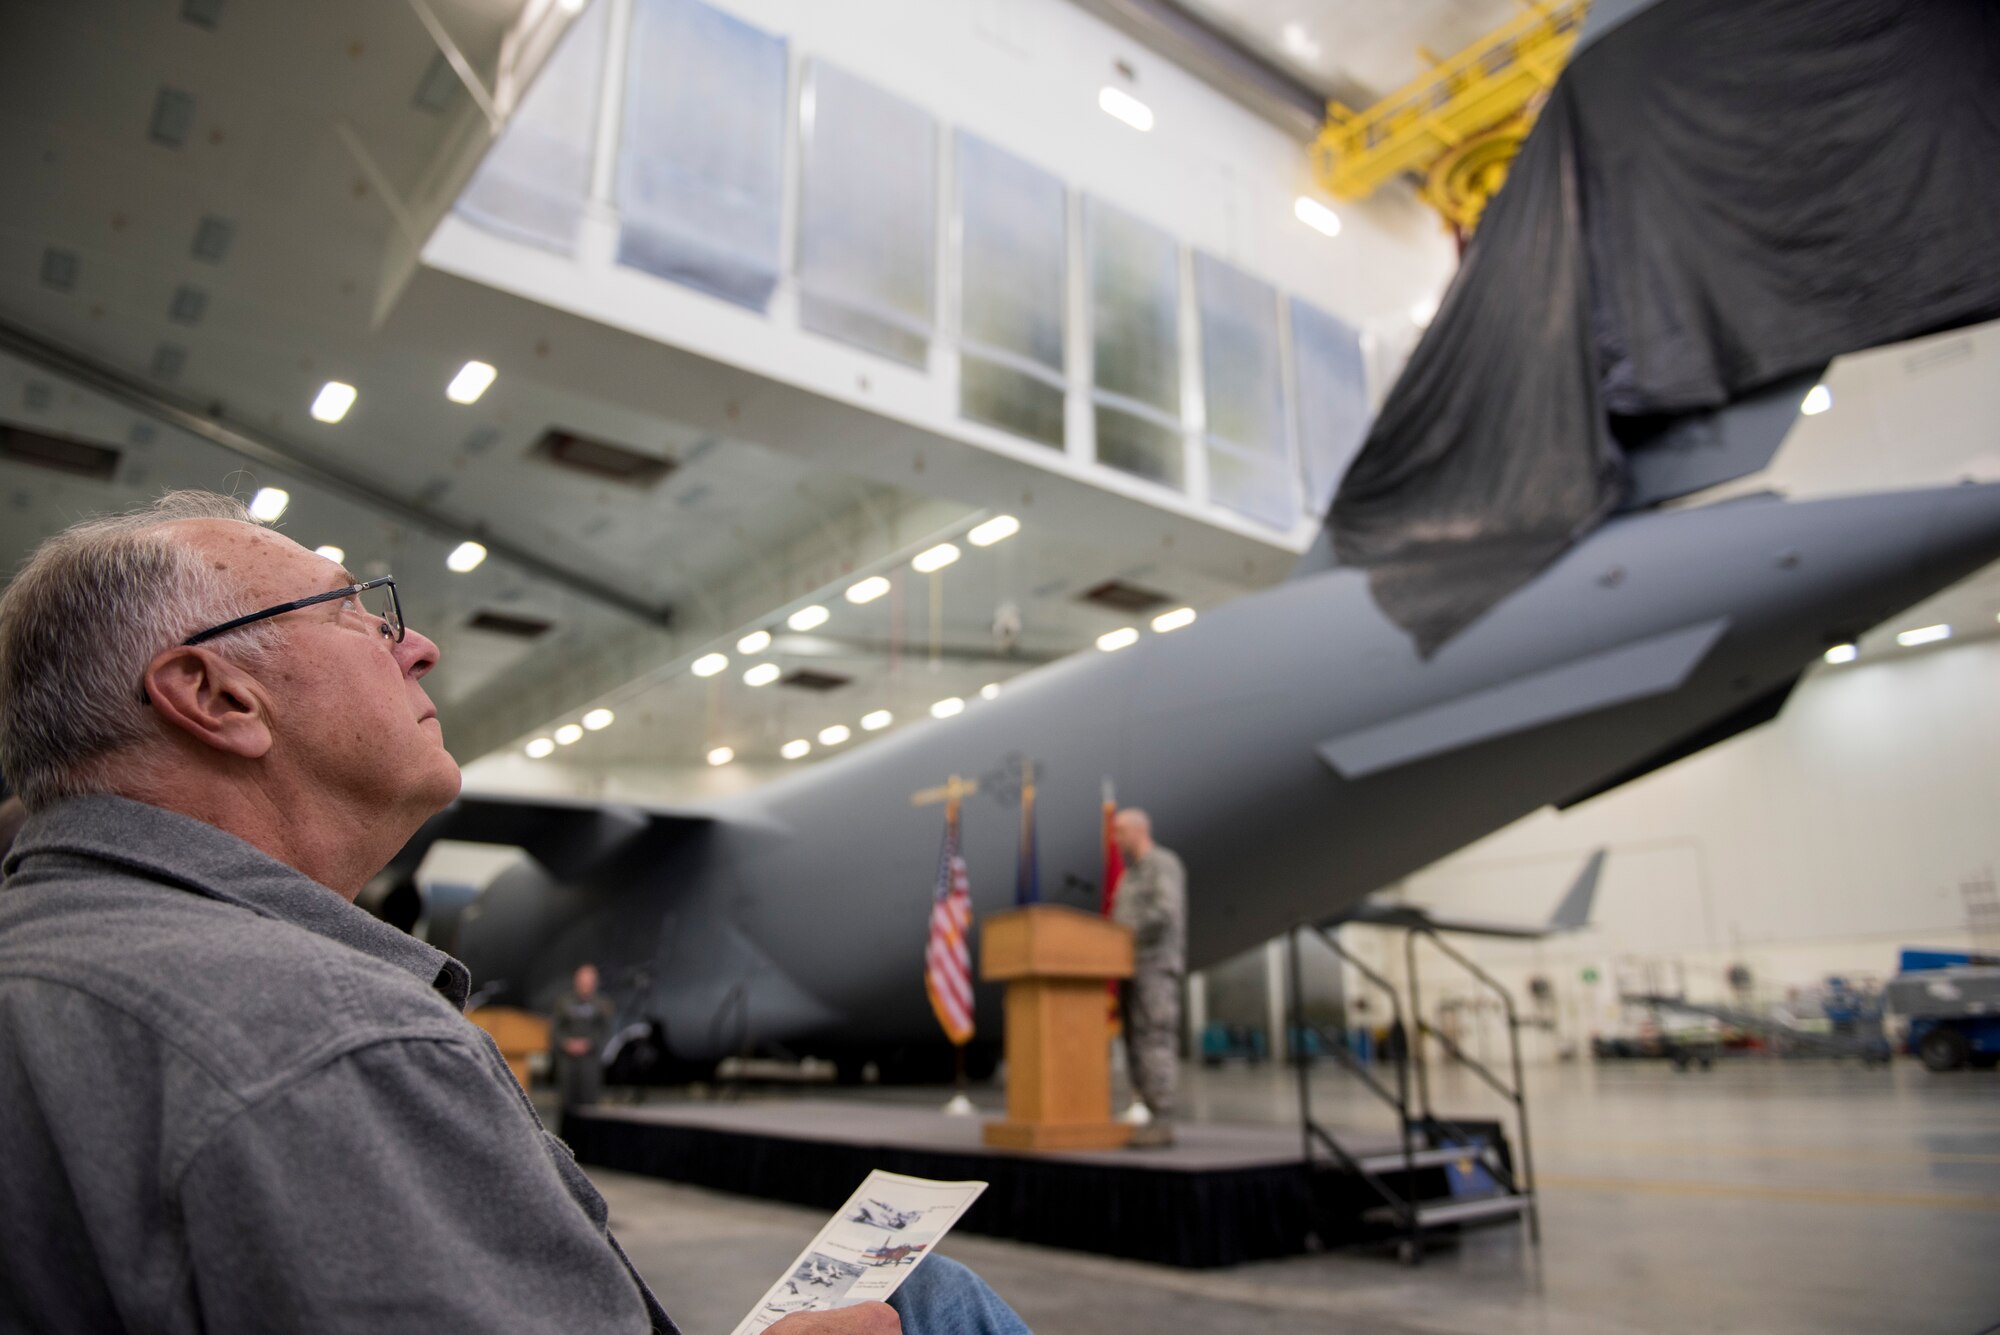 Retired Master Sgt. Don Frederick, a prior CATM instructor with the 176th Security Forces Squadron, awaits the unveiling of a new tail flash here Oct. 1, 2018 on the C-17 Globemaster IIIs assigned to the 176th Wing’s 144th Airlift Squadron. The new tail flash depicts a wolf head, (the 144th AS’s emblem), on one side, and a firebird (the 517th AS’s emblem), of equal size on the other. (U.S. Air National Guard photo by Tech. Sgt. N. Alicia Halla)